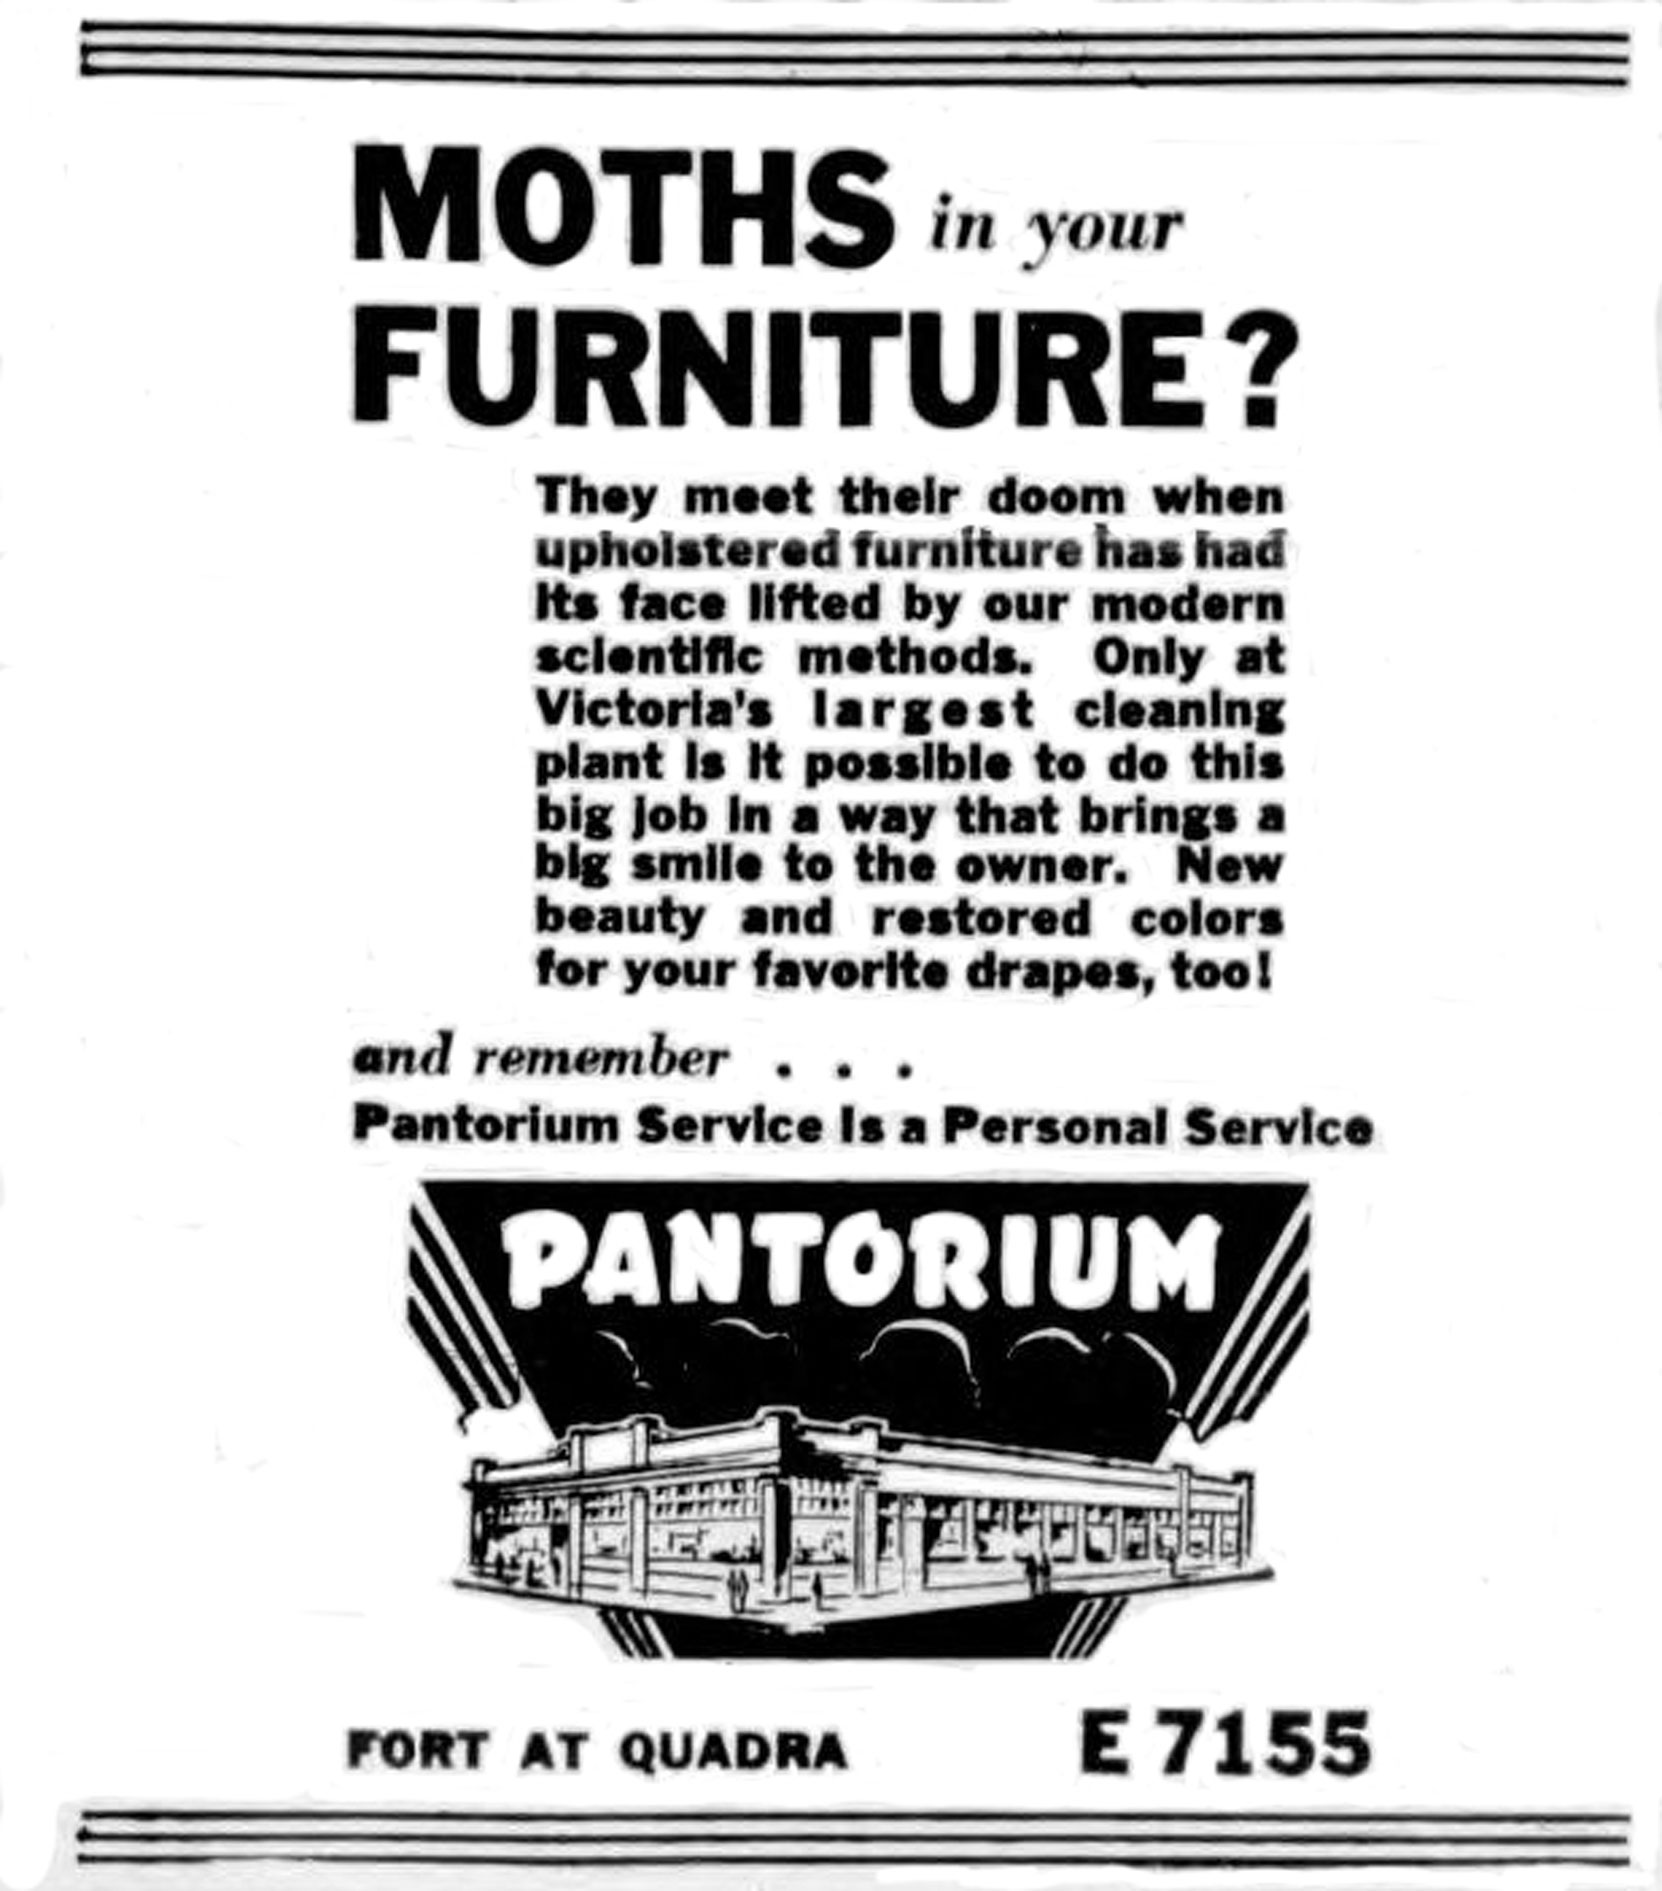 1946 advertisement for the Pantorium, 905 Fort Street. Note the drawing of the building in the advertisement. (Photo: Victoria Online Sightseeing Tours collection)